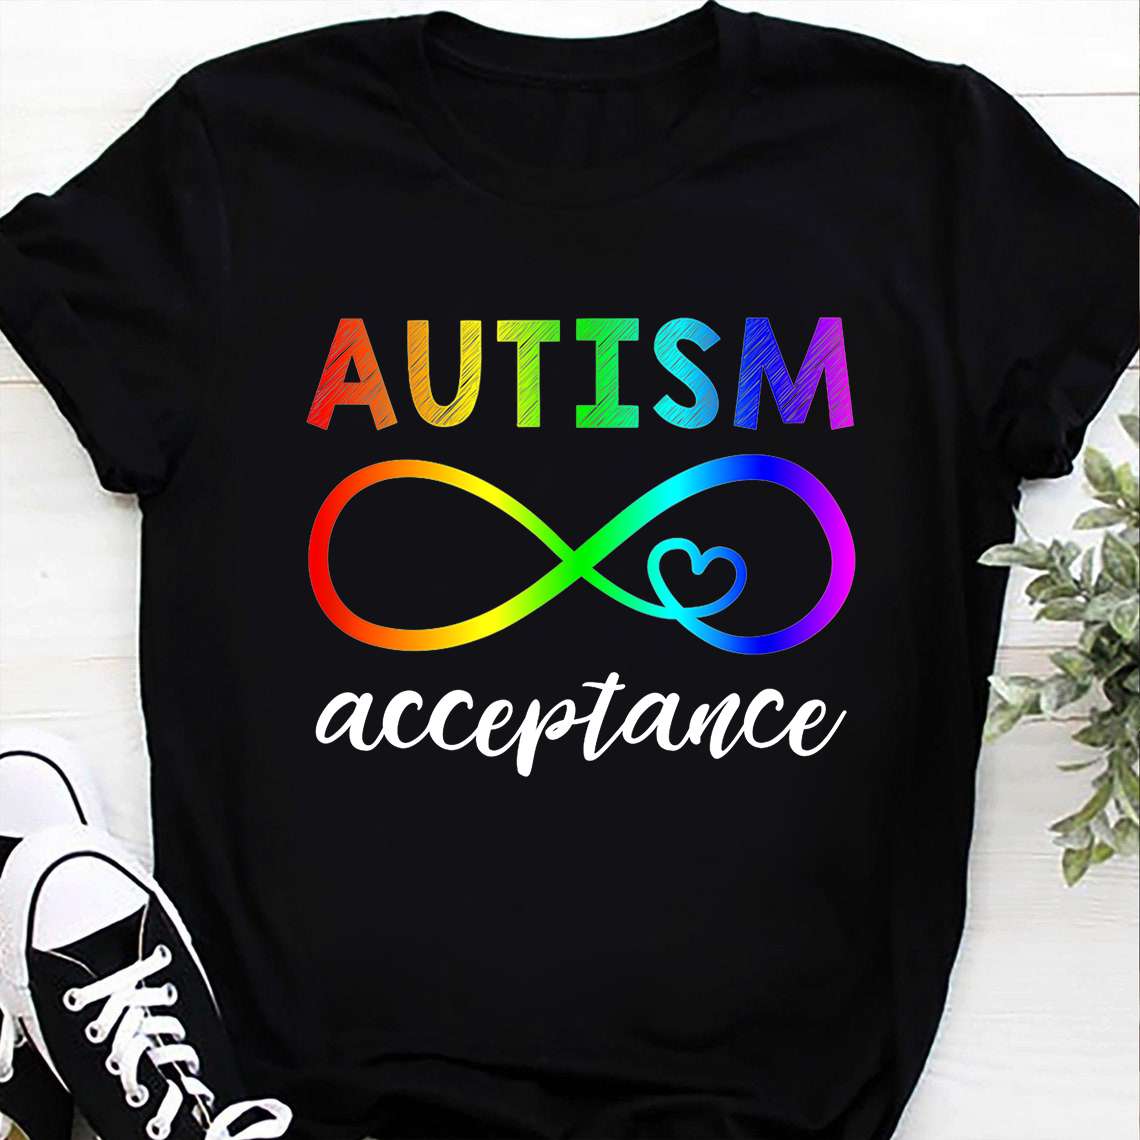 Autism acceptance - Autism awareness, love and accept